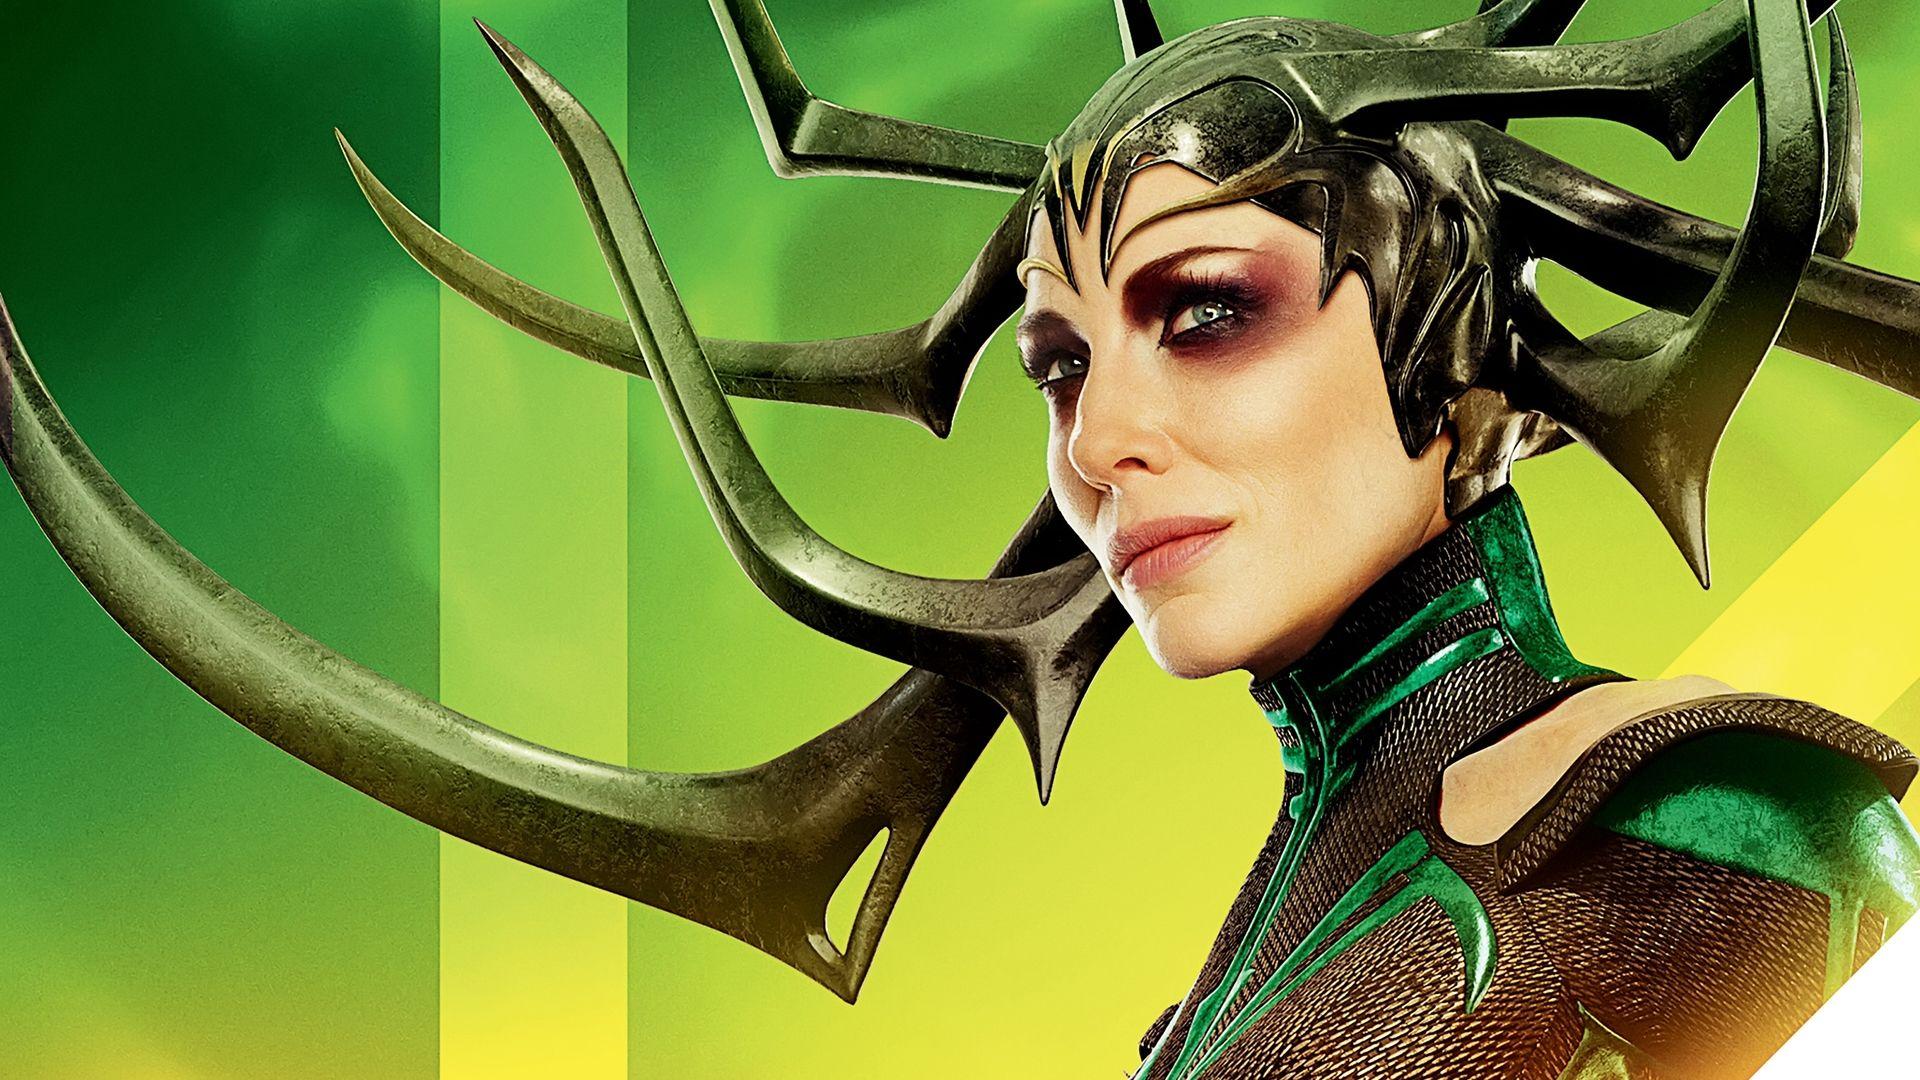 Download Cate Blanchett As Hela In Thor 240x320 Resolution, Full.